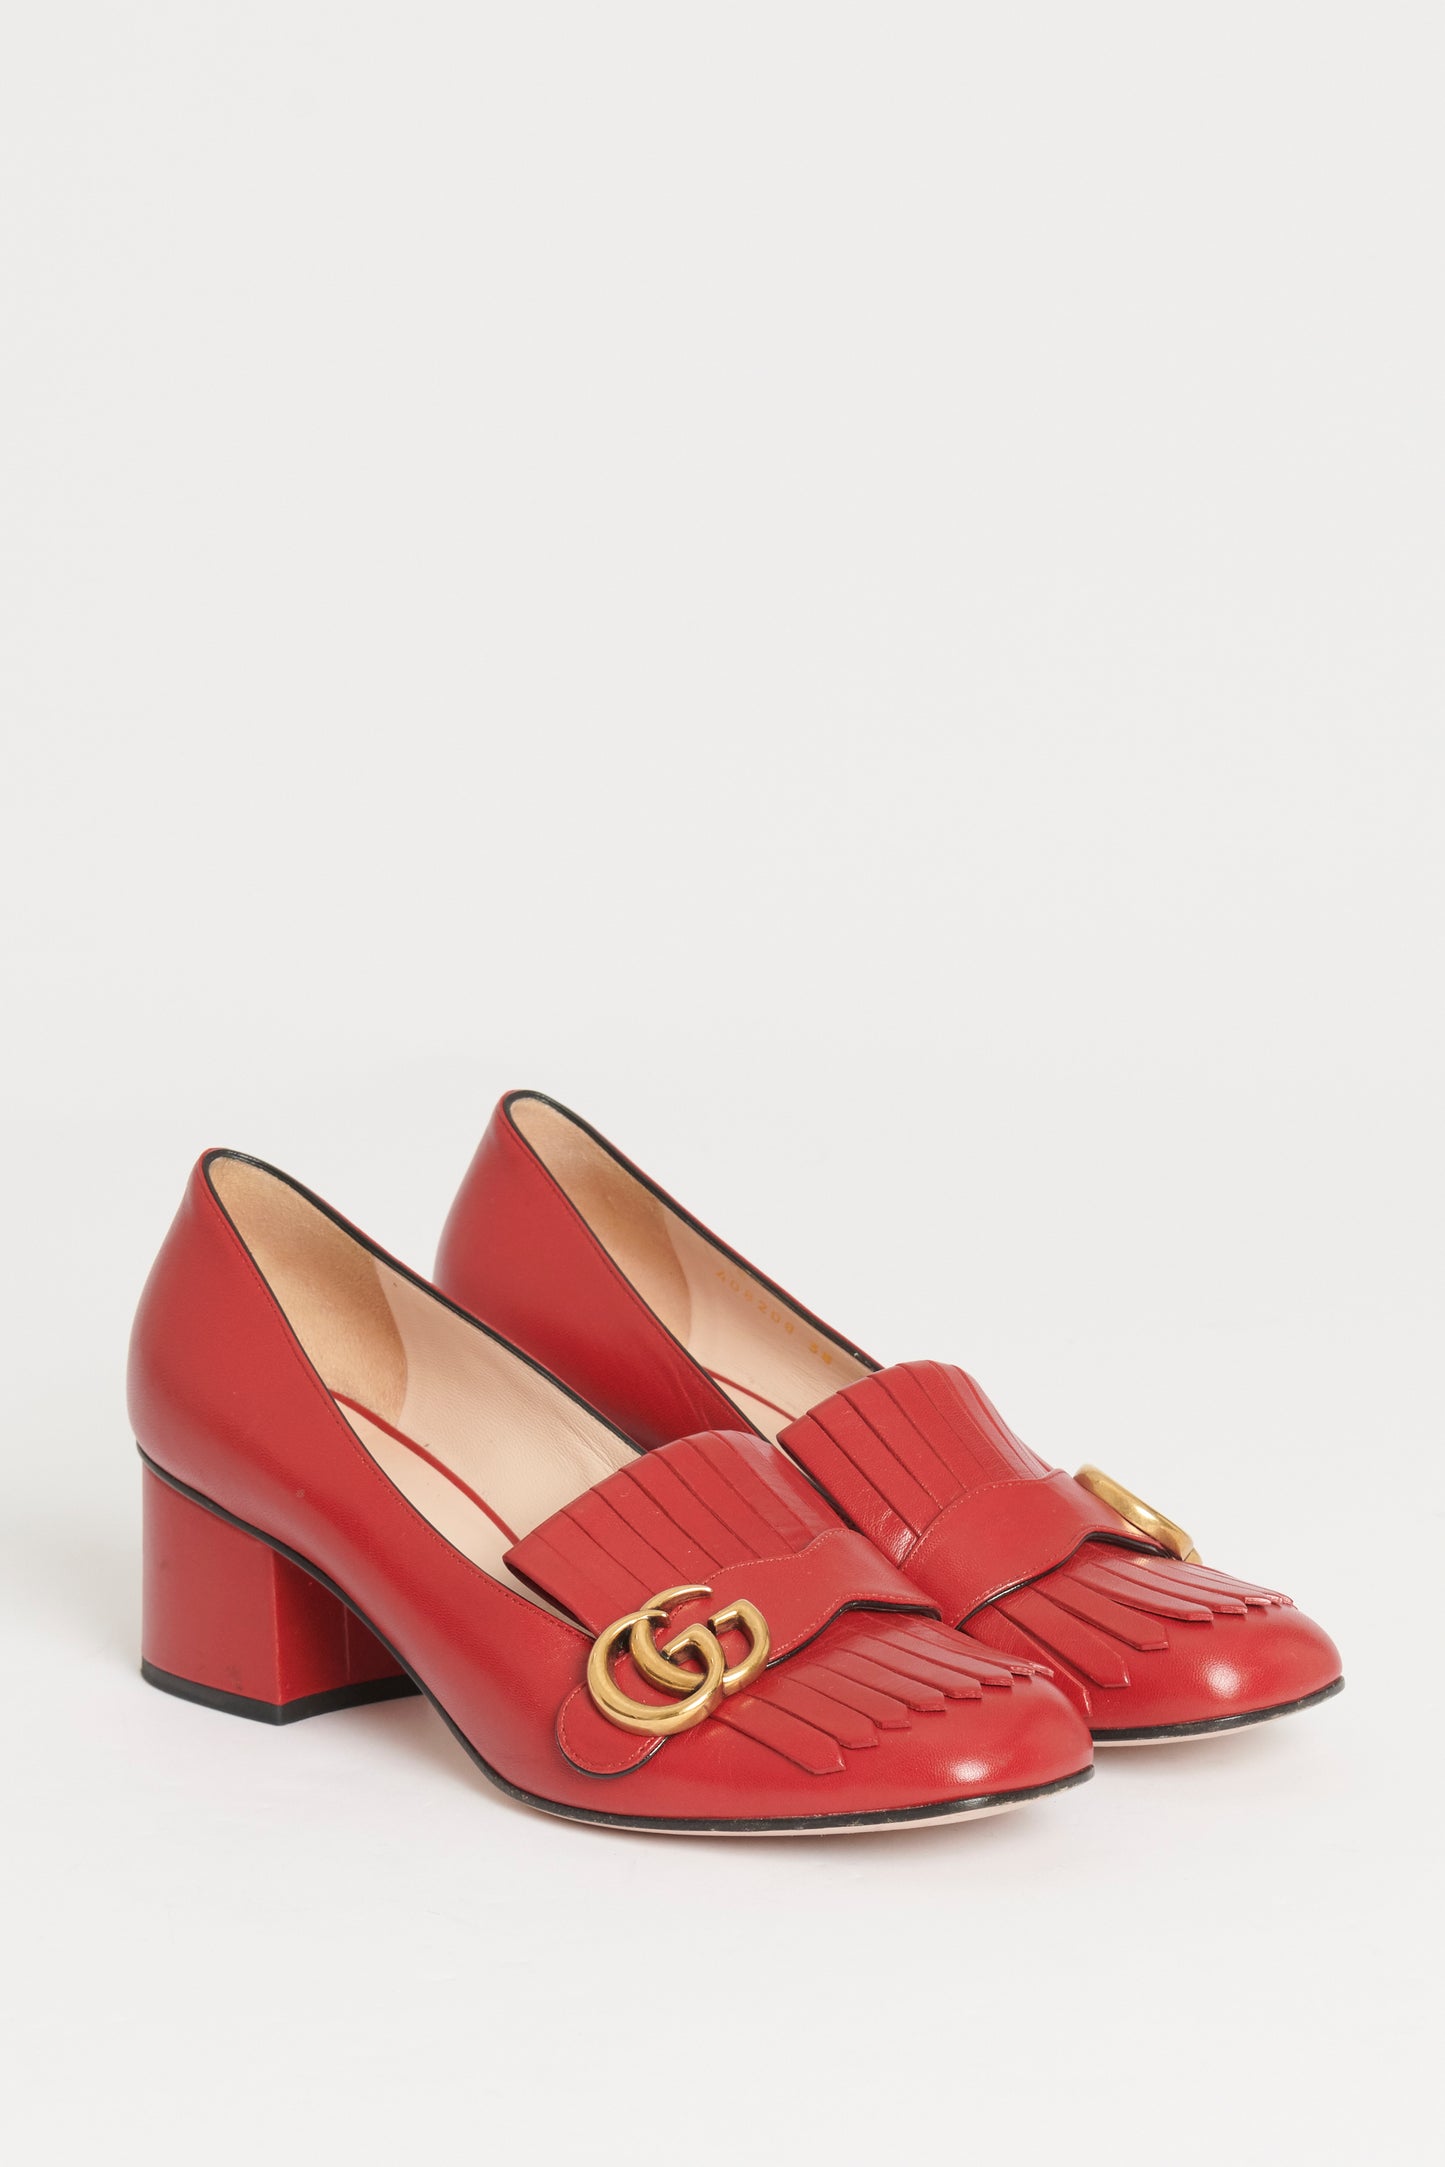 Red Leather Preowned Marmont Fringed Loafer Style Pumps